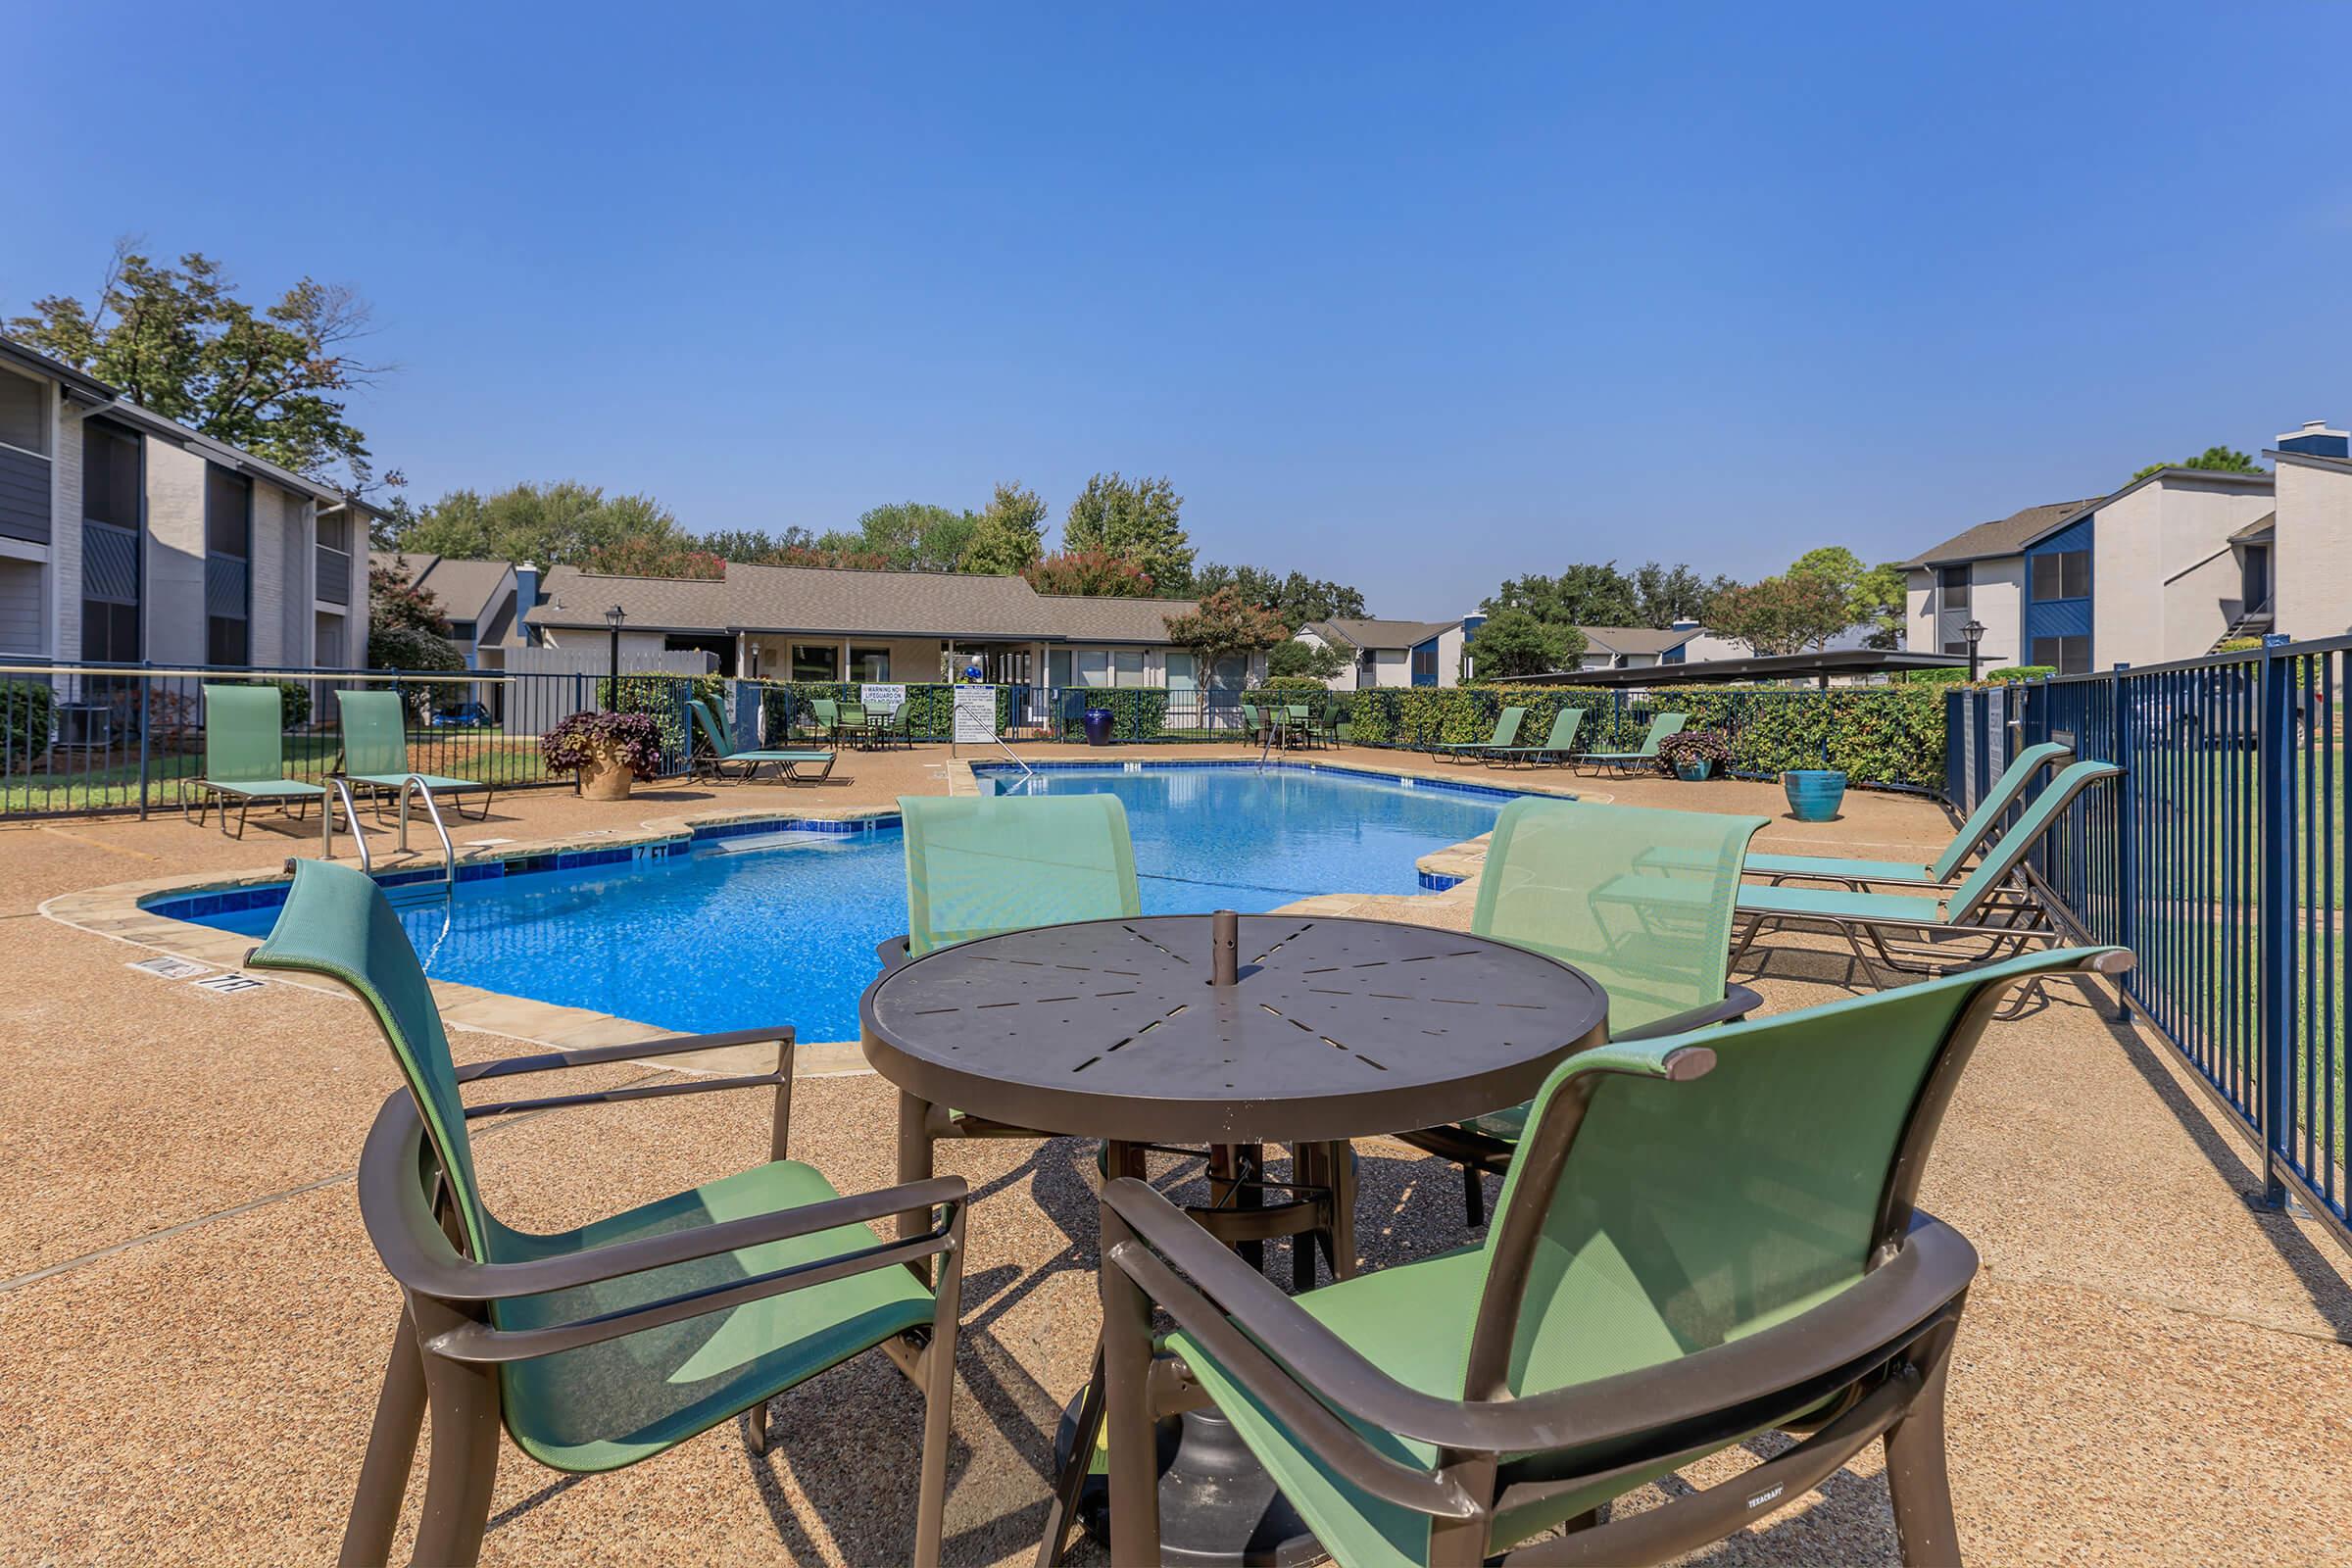 Table and chairs surrounding the dazzling pool at Rise Oak Creek in Bedford, TX.